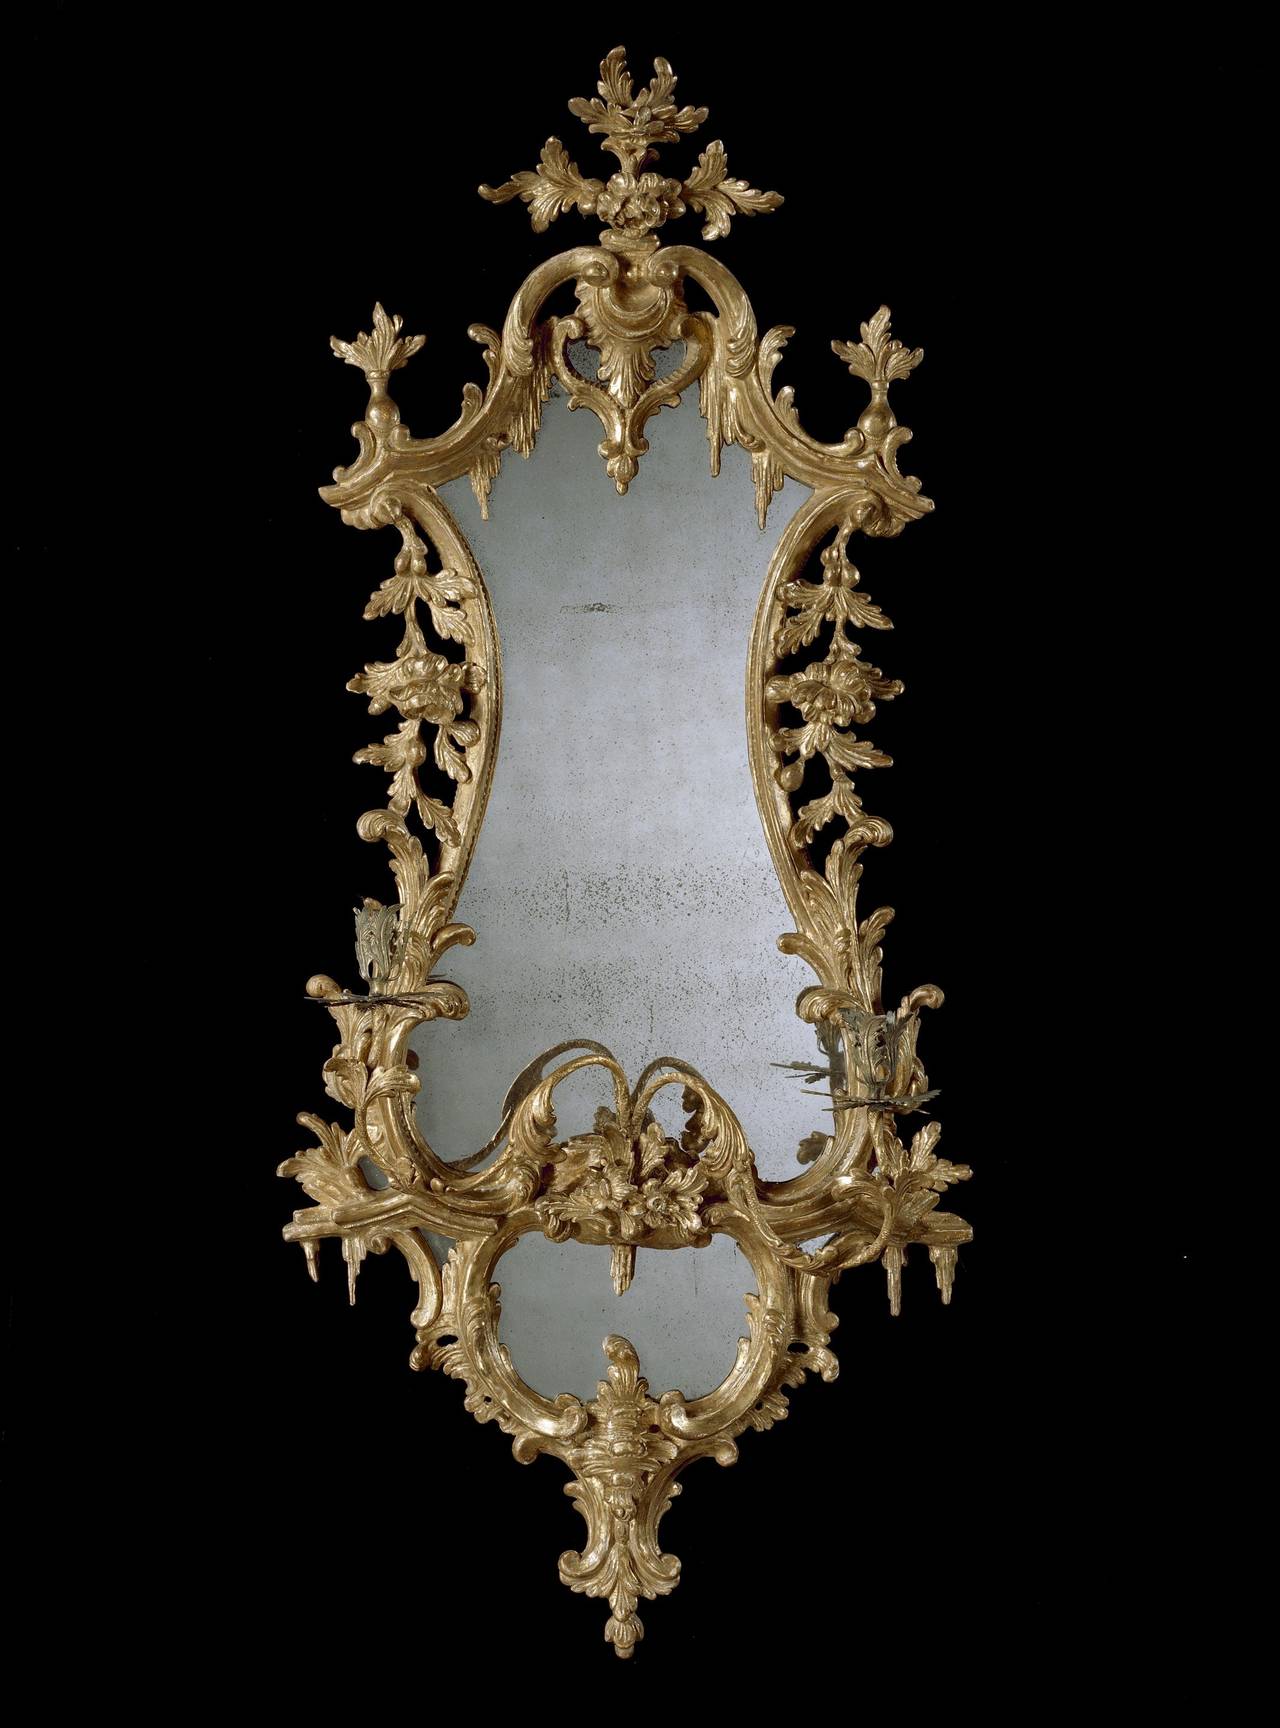 A pair of mid-18th century Chippendale period carved giltwood girandoles, each having 18th century replaced mirror plates within a waisted giltwood frame with shaped canopy carved with waterfall acanthus leaf decoration and trailing flowers to the